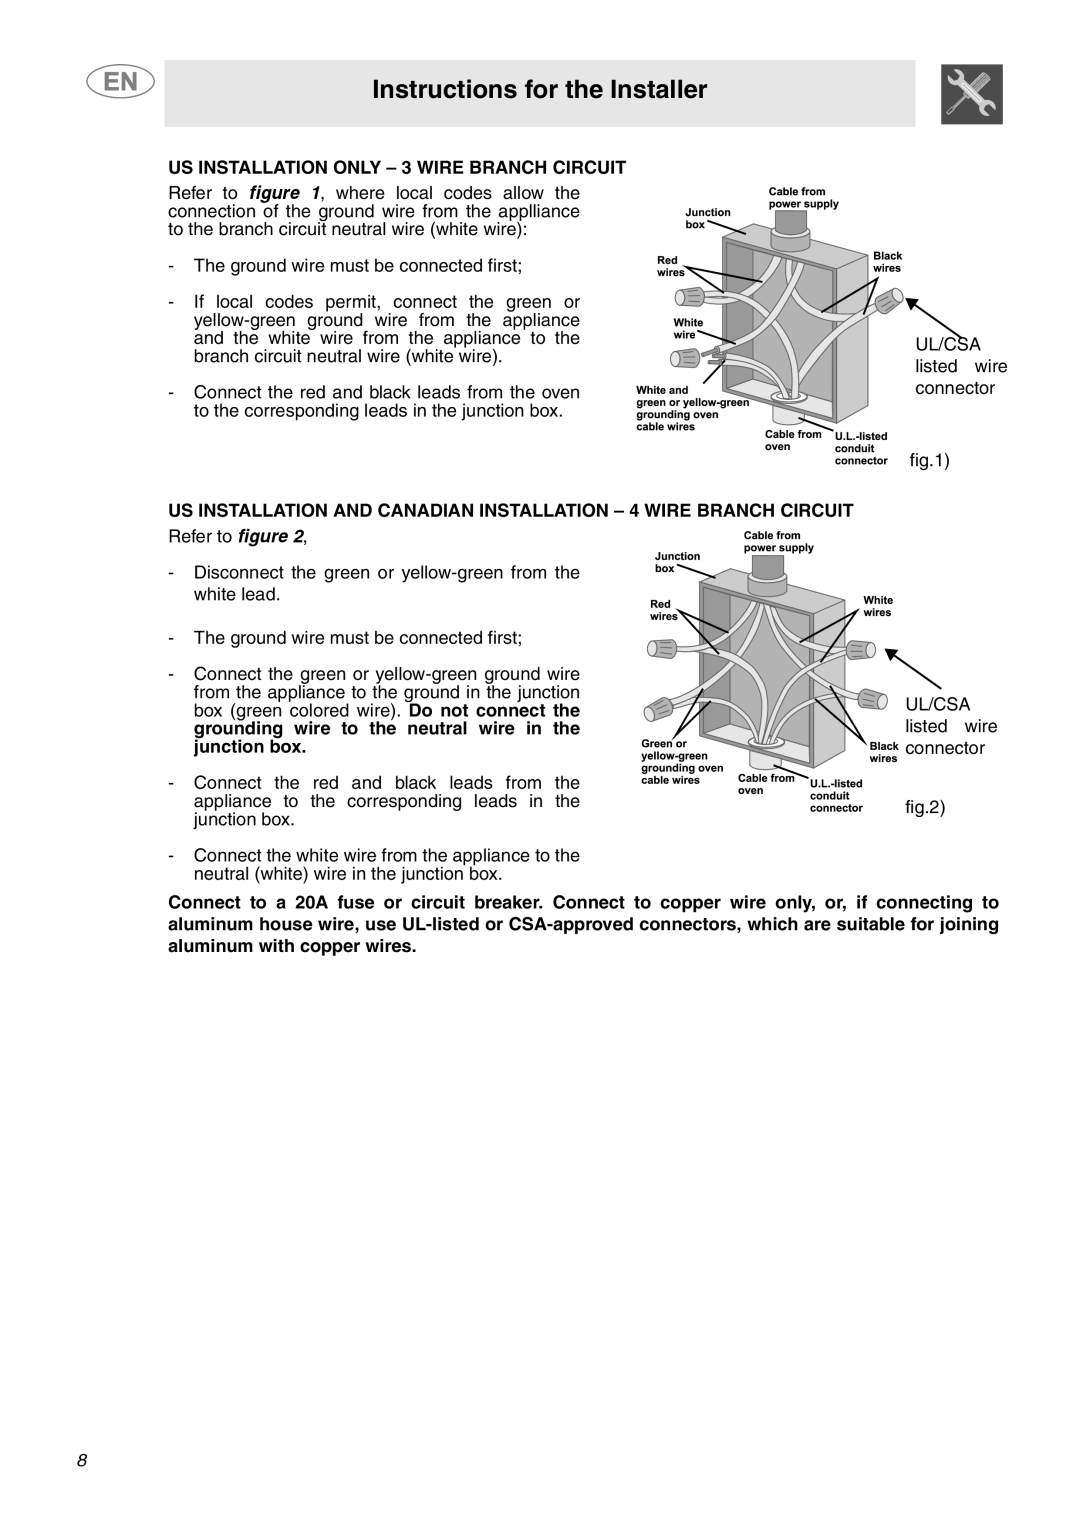 Smeg SCP160XU, SCP171XU Instructions for the Installer, US INSTALLATION ONLY - 3 WIRE BRANCH CIRCUIT 